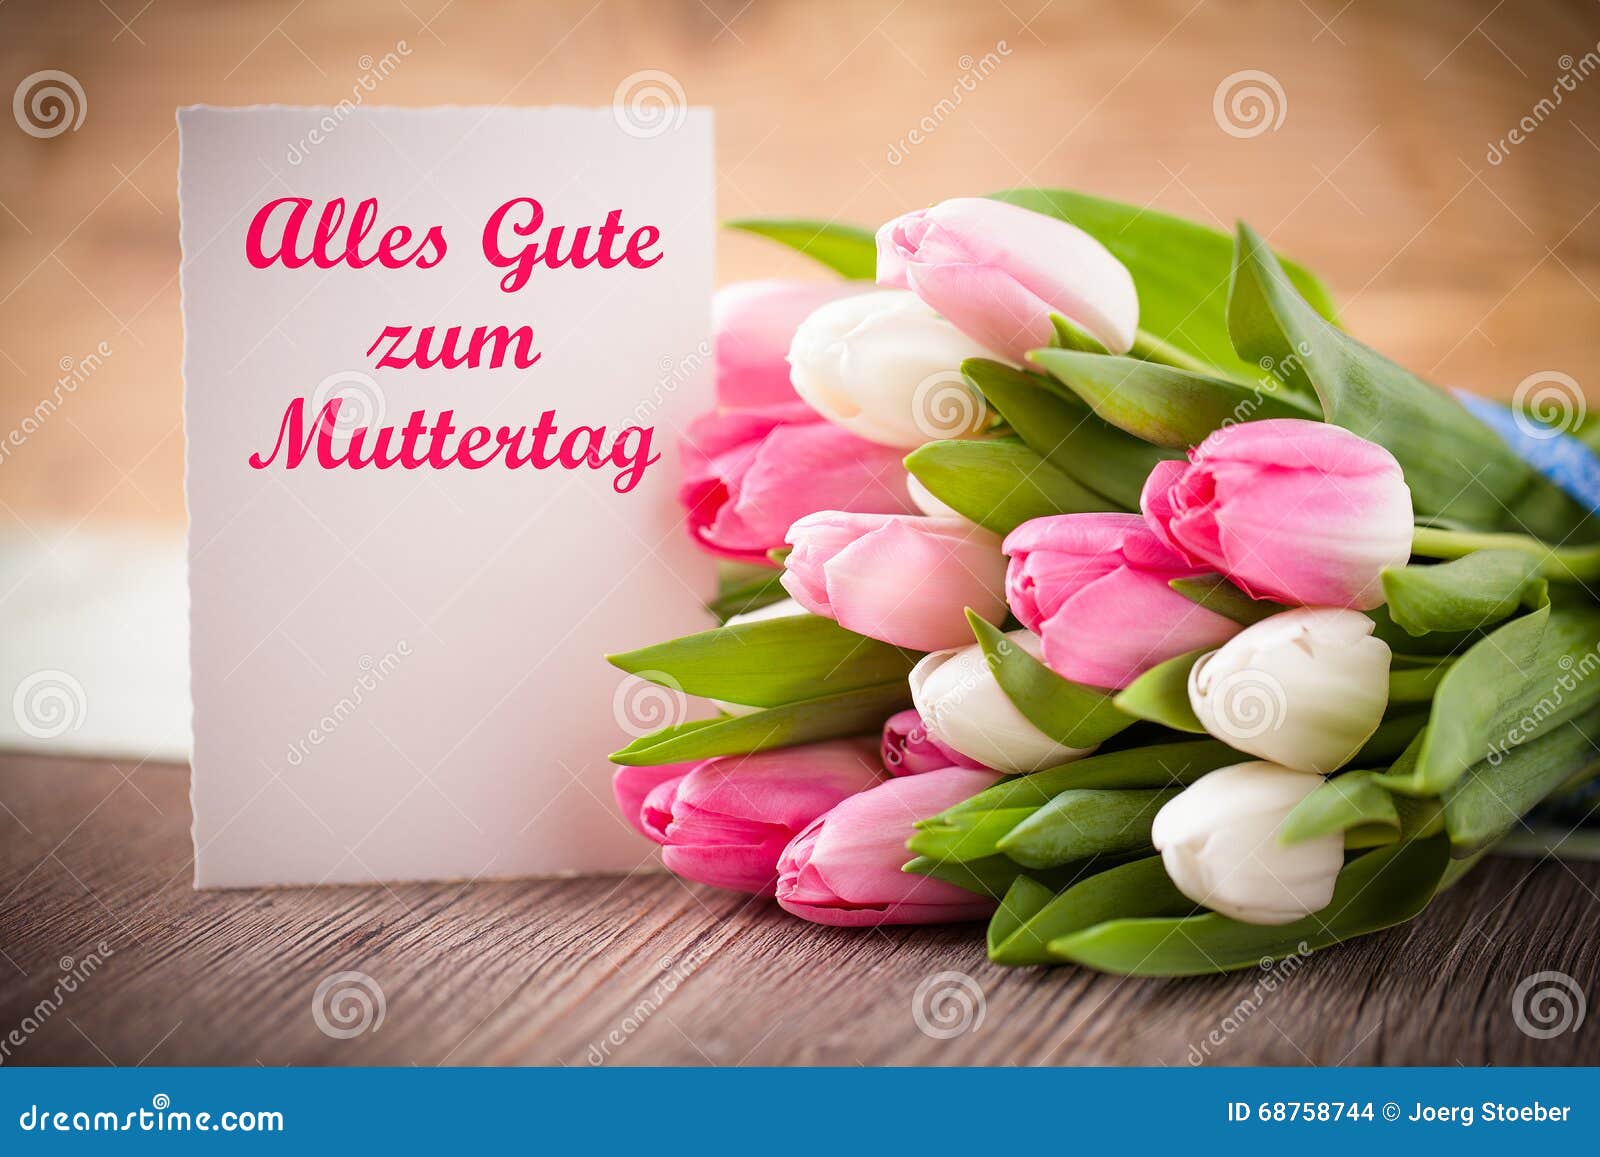 Tulips With Message Saying Best Wishes For Mother S Day In German Stock Photo Image Of Nature Gift